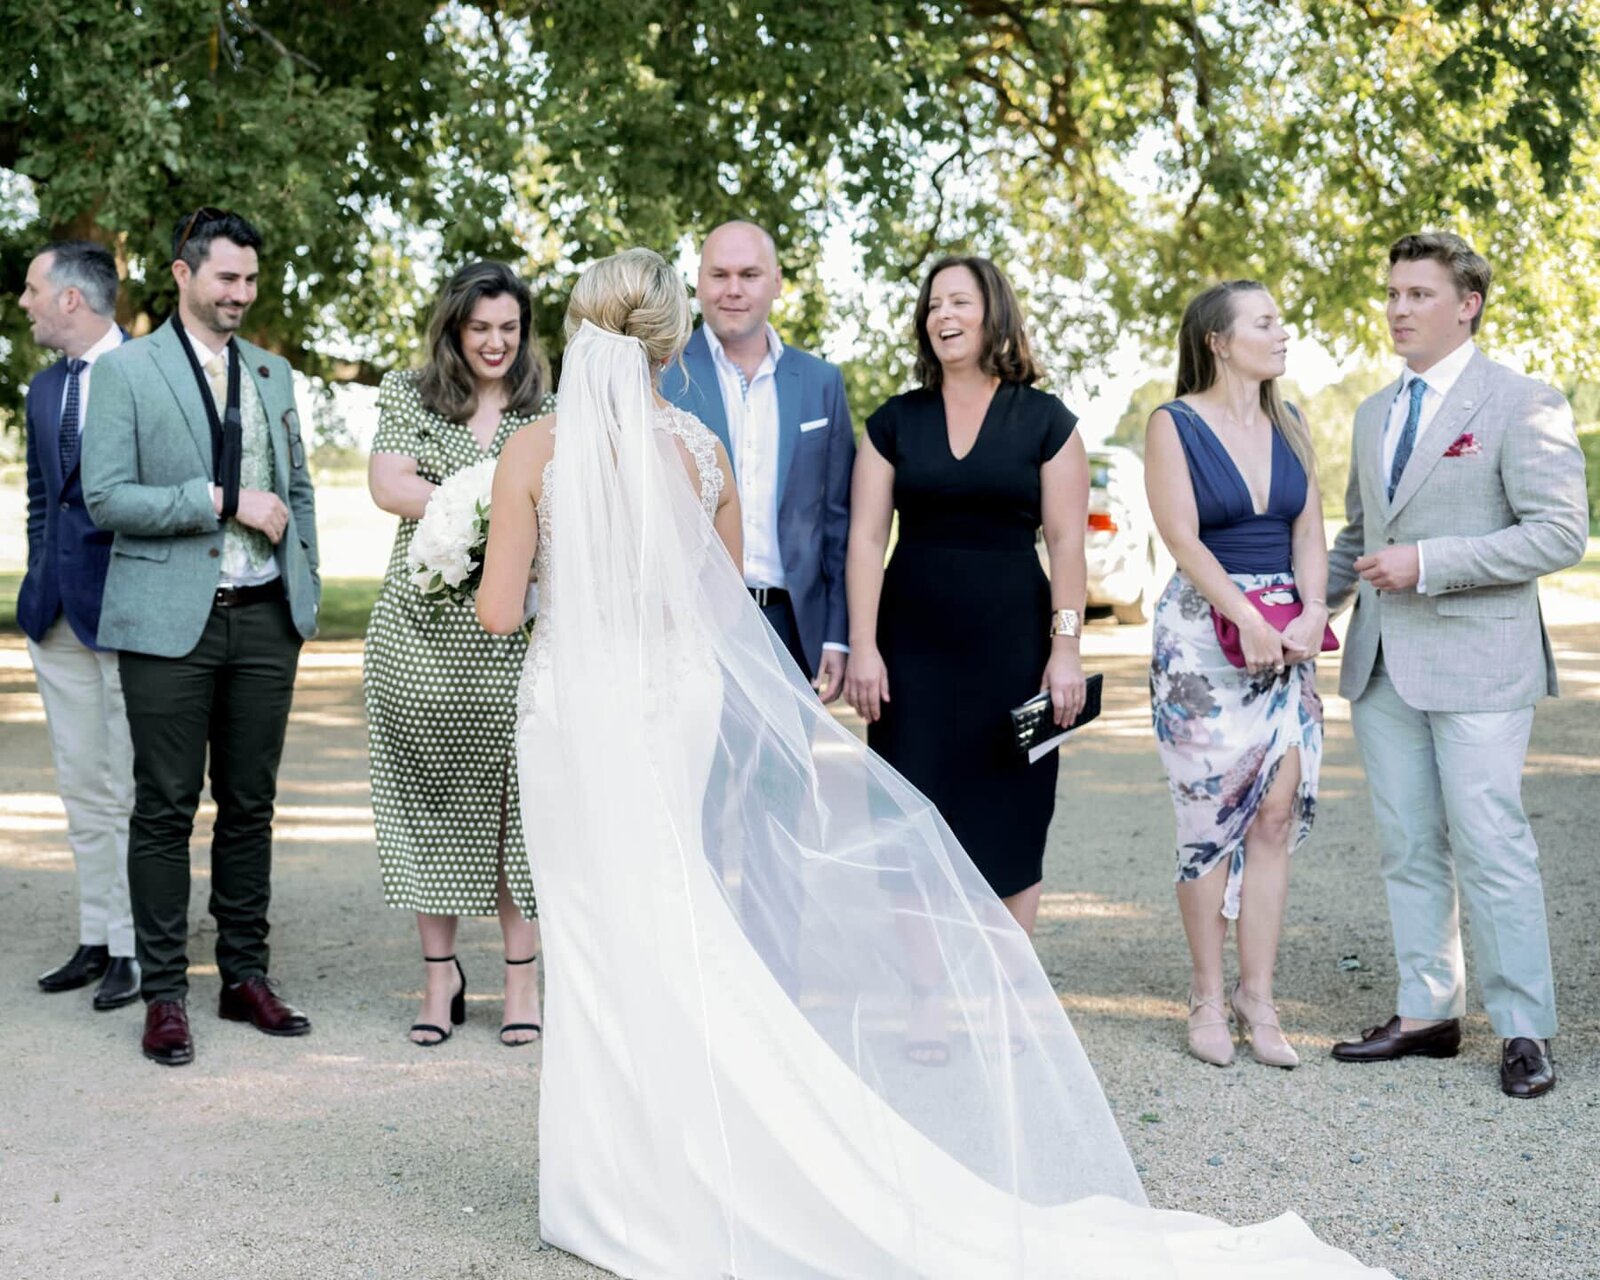 Stones of the Yarra Valley wedding - Serenity Photography 64